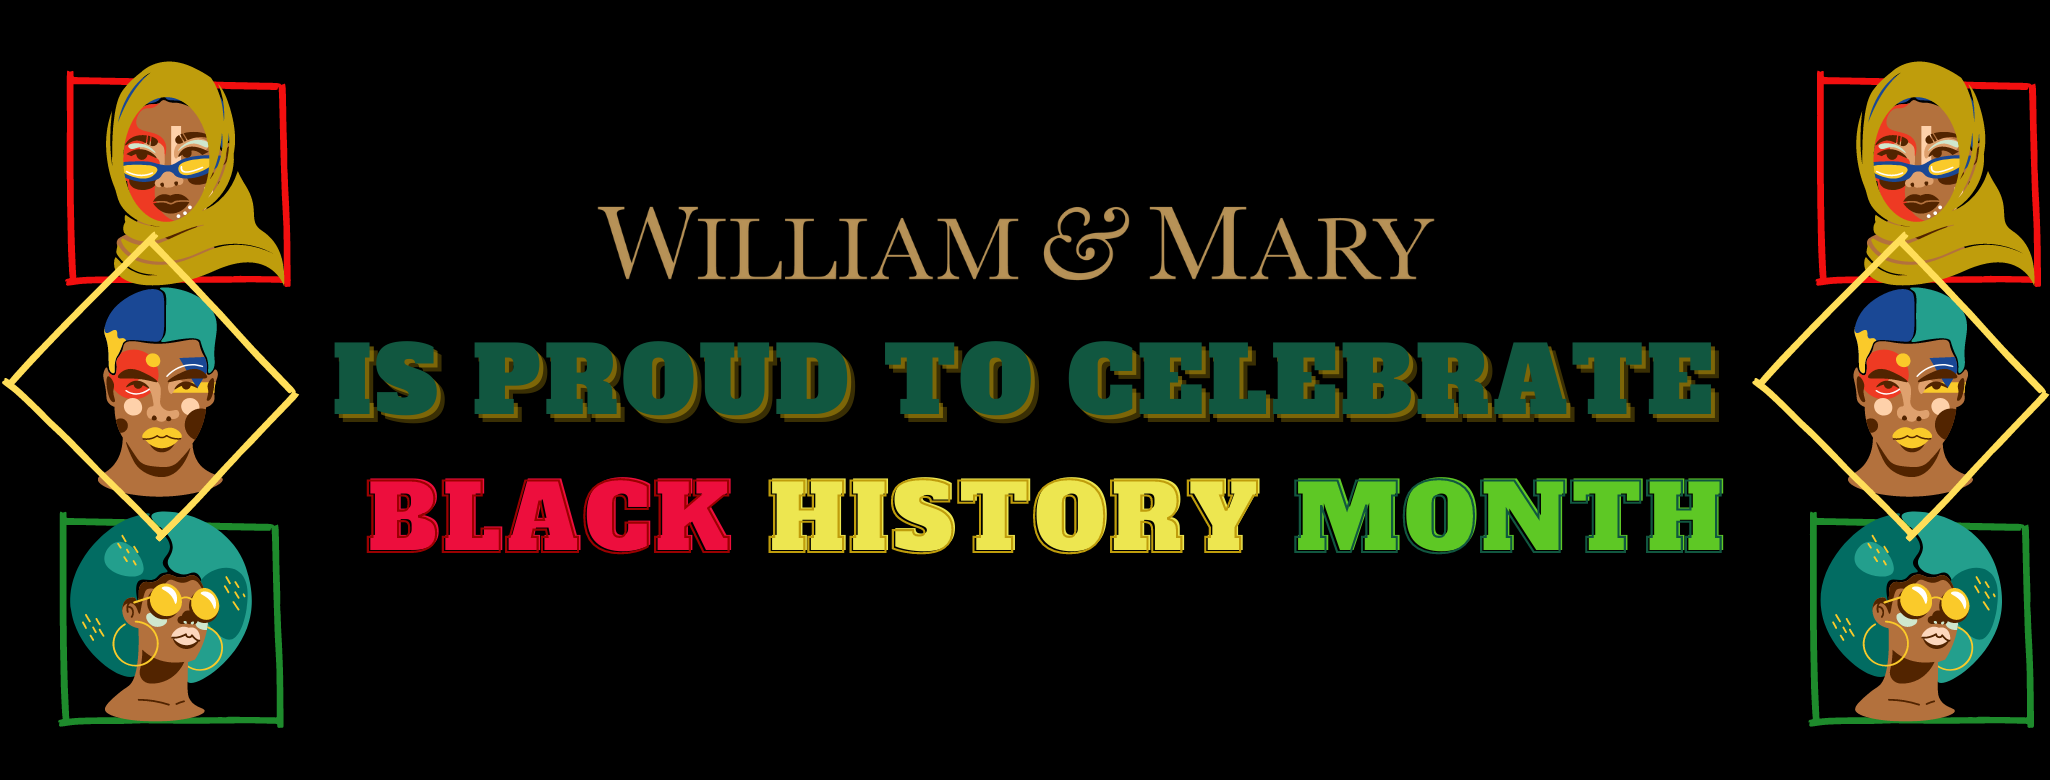 wm-is-proud-to-celebrate-bhm-2.png